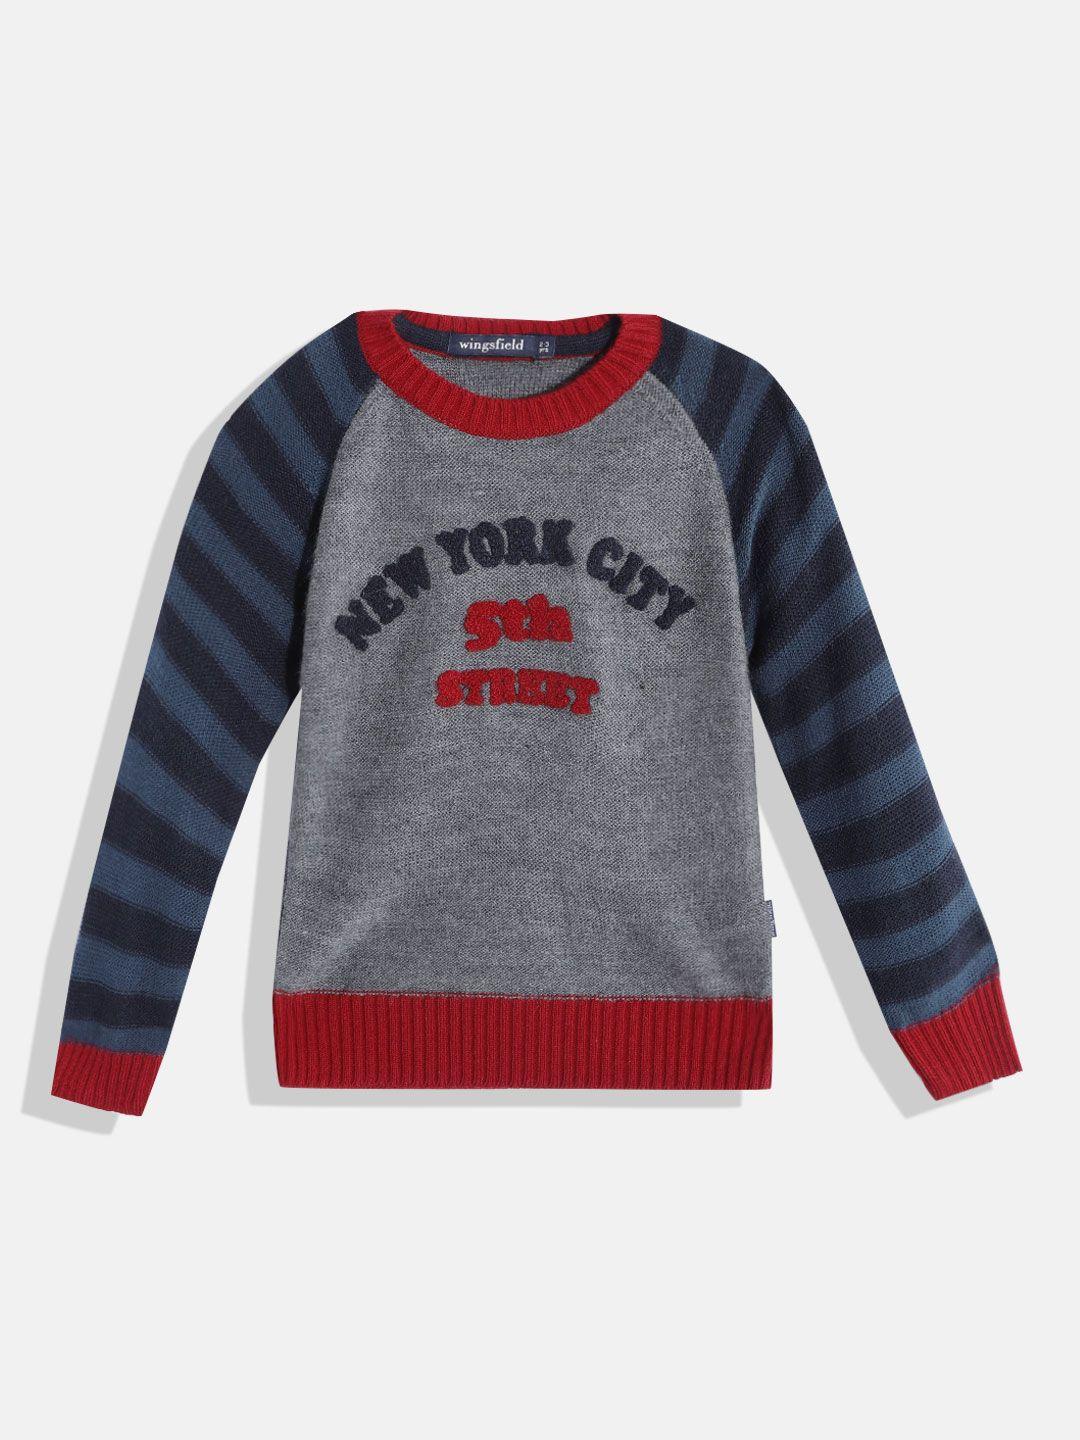 wingsfield-boys-grey-&-red-typography-printed-acrylic-pullover